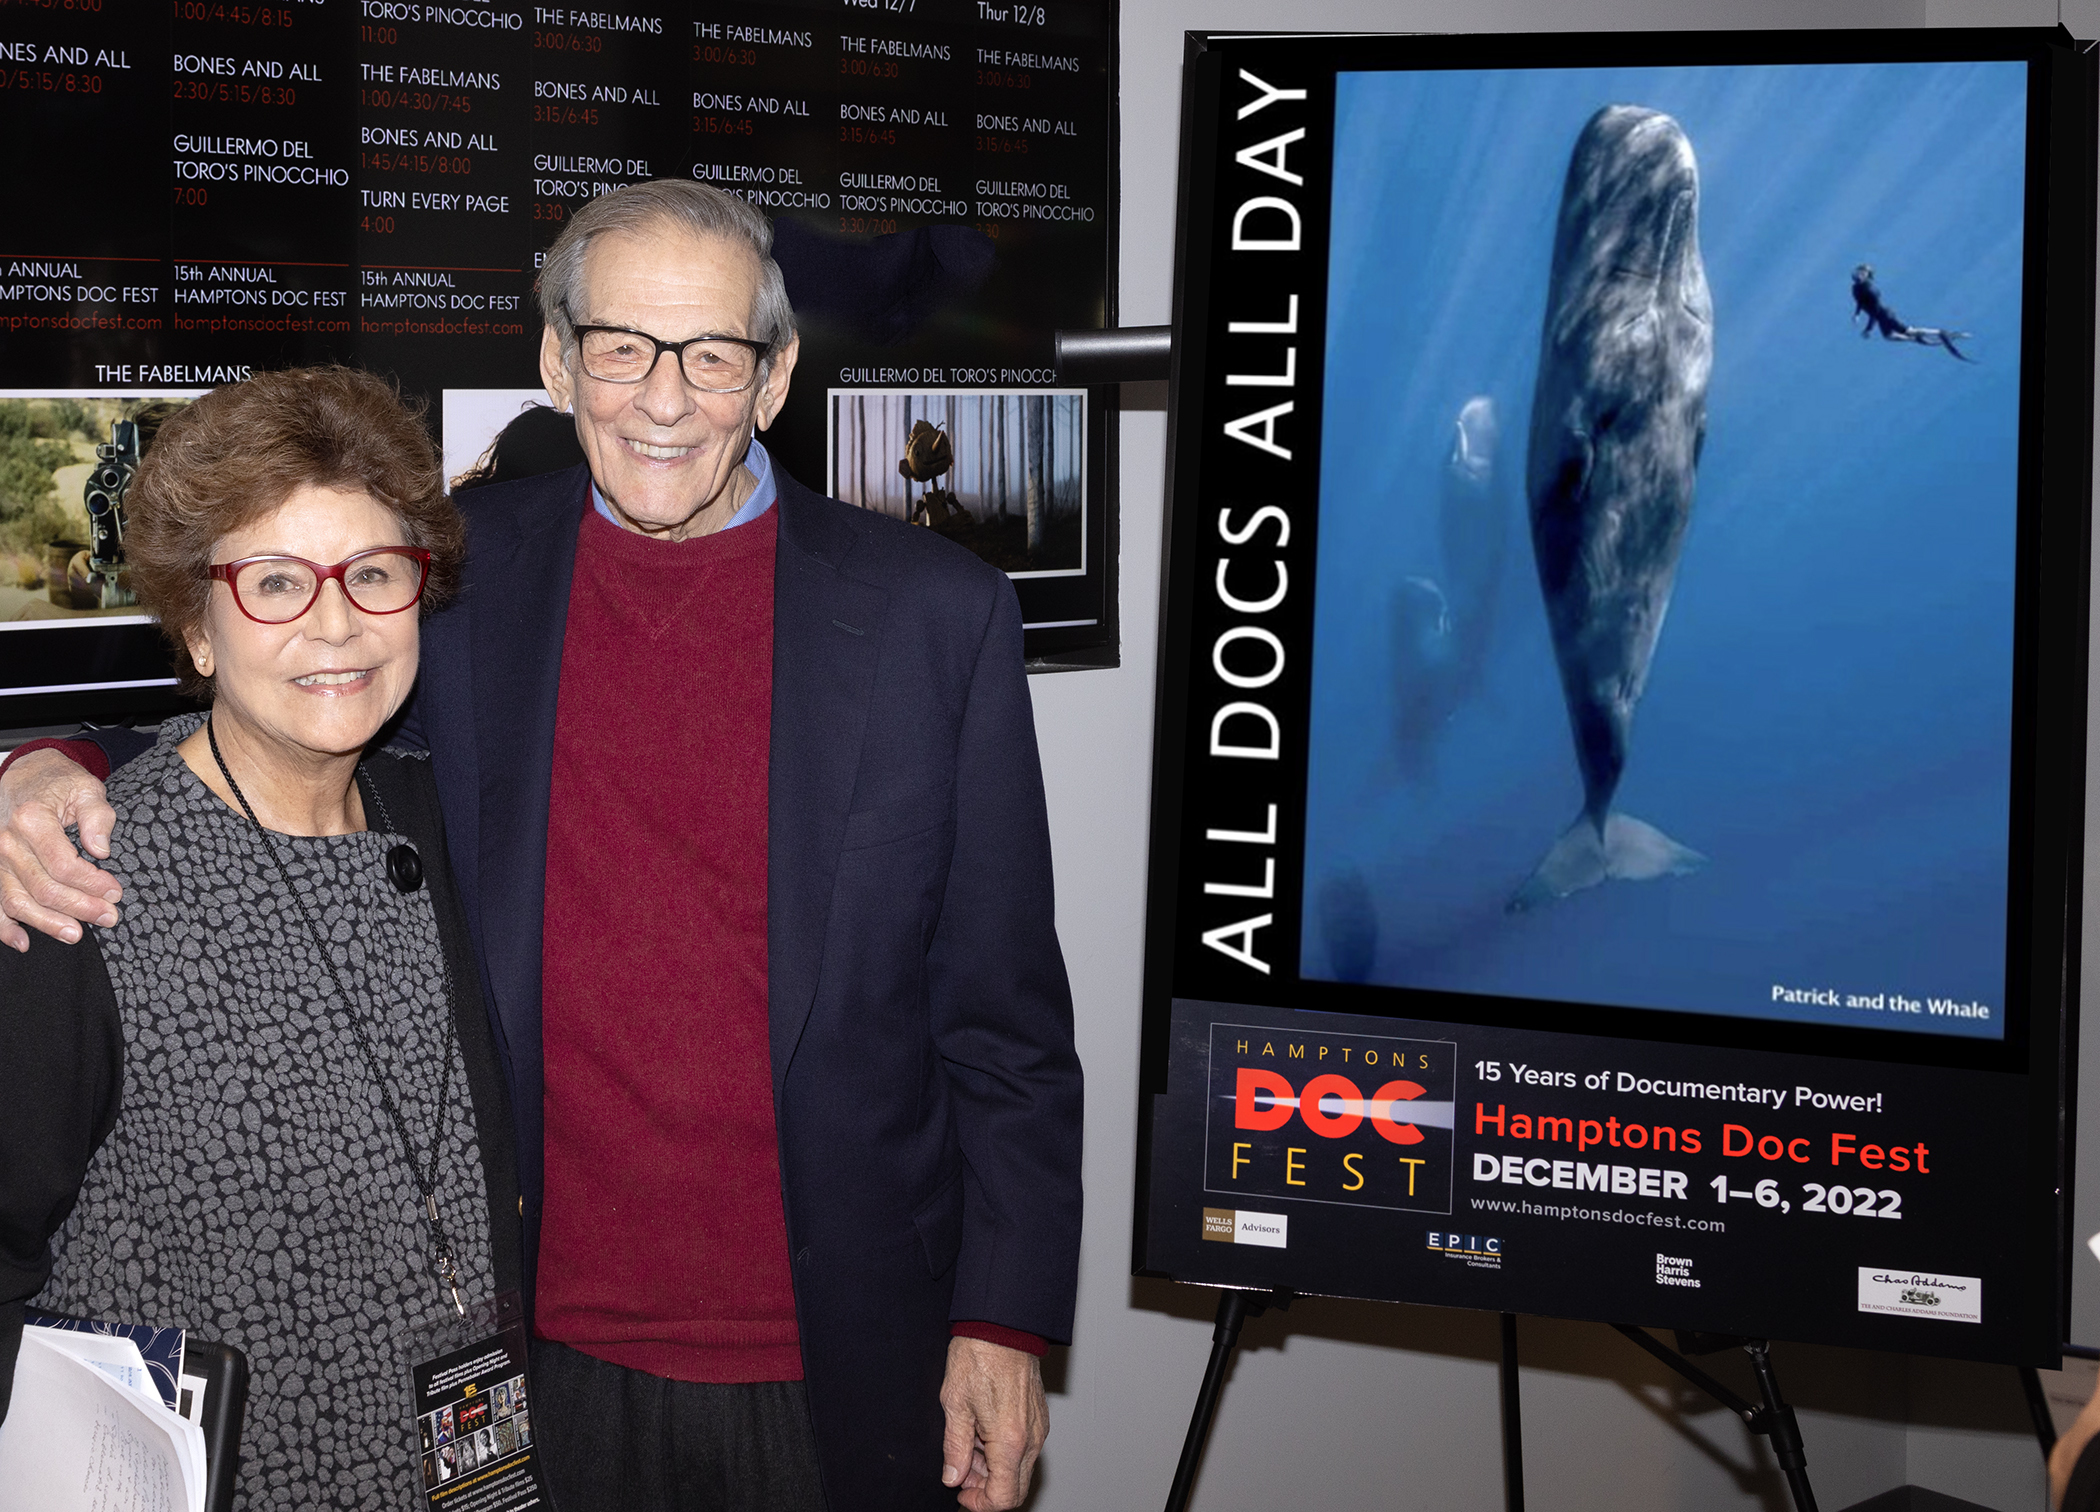 Hamptons Doc Fest founder/executive director Jacqui Lofaro with Robert Caro on December 4 at Sag Harbor Cinema, after the screening of “Turn Every Page,” which ended up winning the Brown Harris Stevens Audience Award. CB GRUBB/COURTESY HAMPTONS DOC FEST